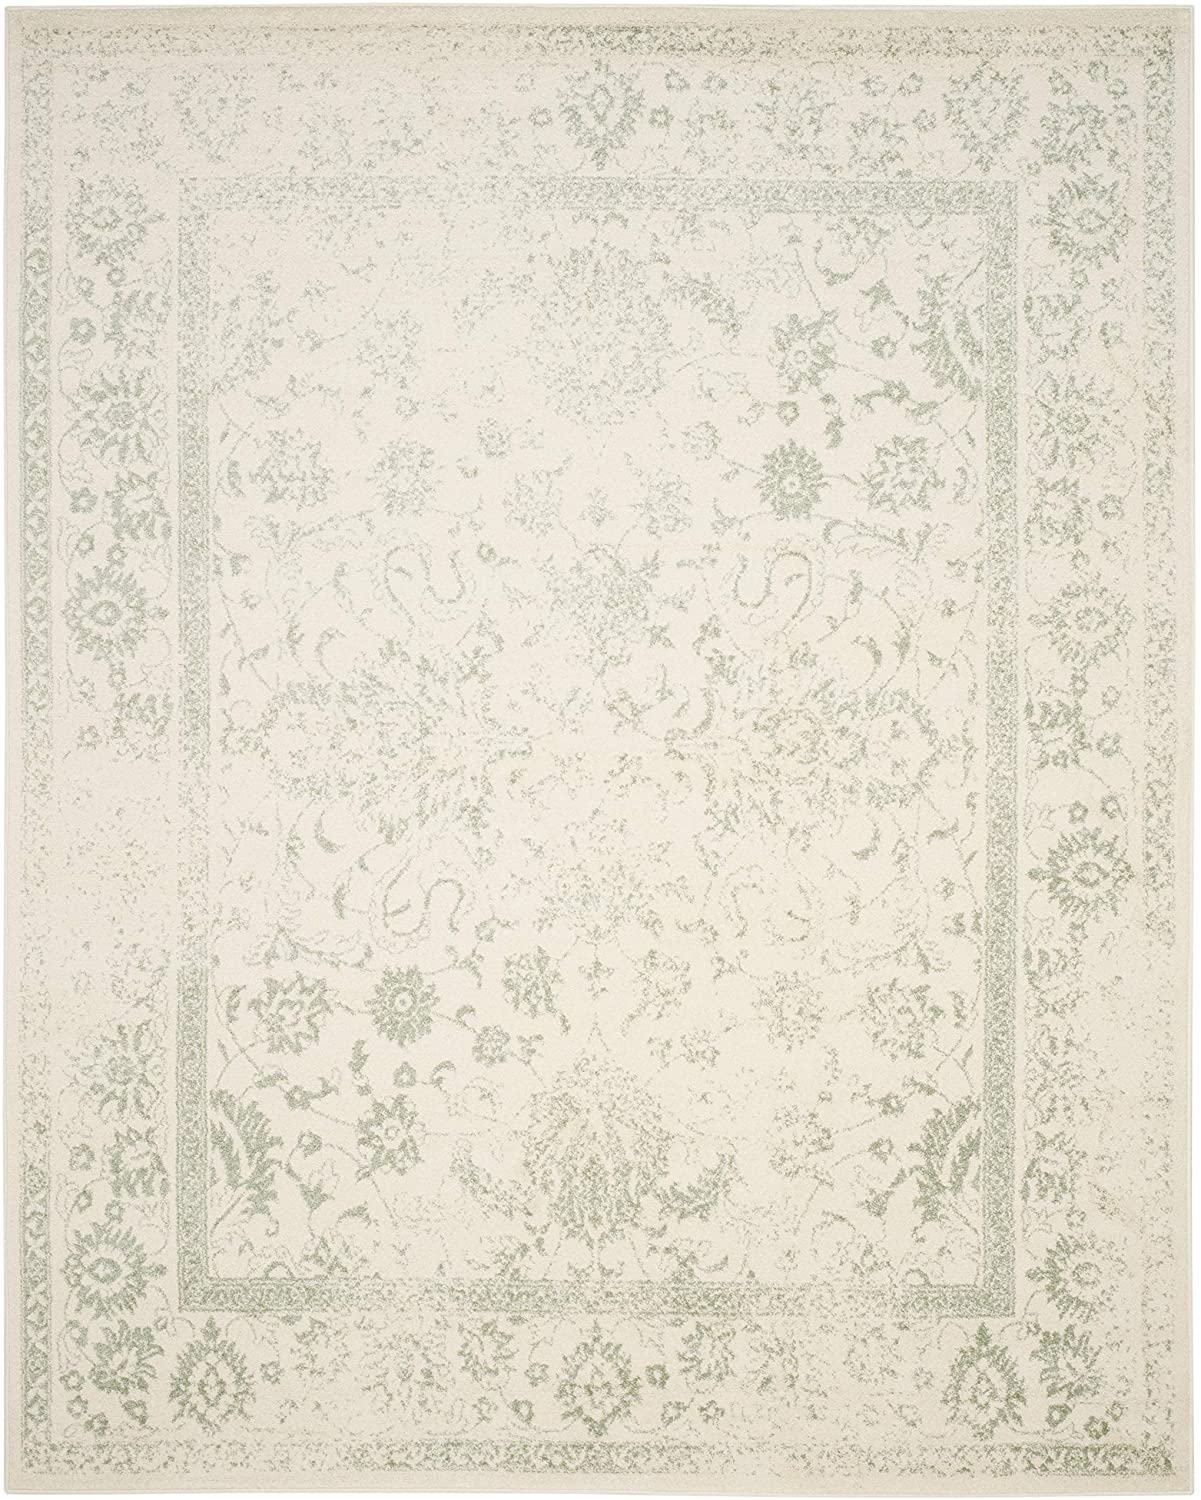 Safavieh Adirondack Collection ADR109S Oriental Distressed Non-Shedding Stain Resistant Living Room Bedroom Runner, 2'6" x 12' , Ivory / Slate